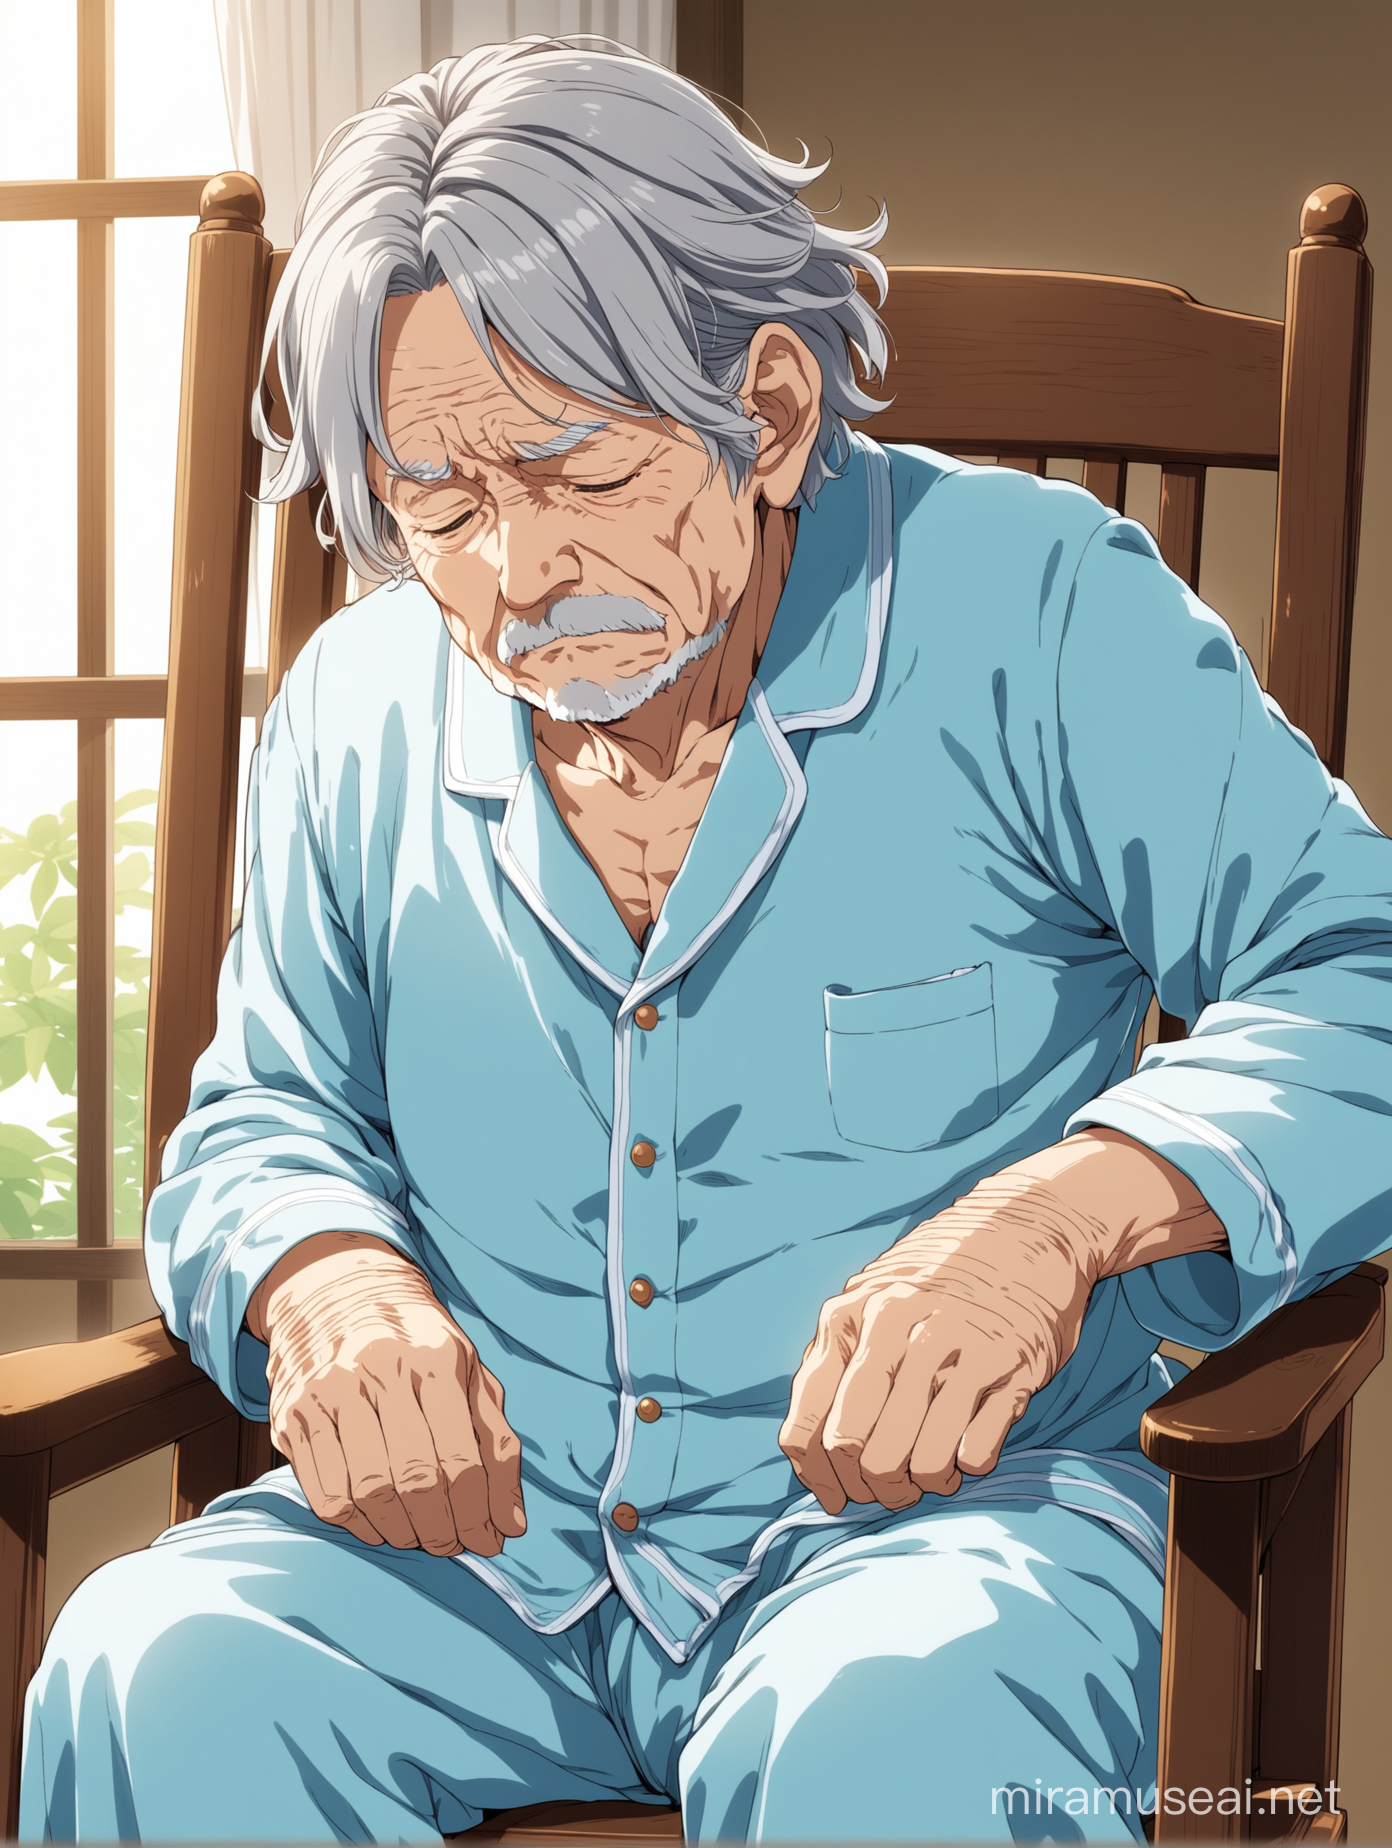 Anime, Old wrinkled man, with wavy gray hair, wearing light blue pajamas, white sweater, in rocking chair, tired.